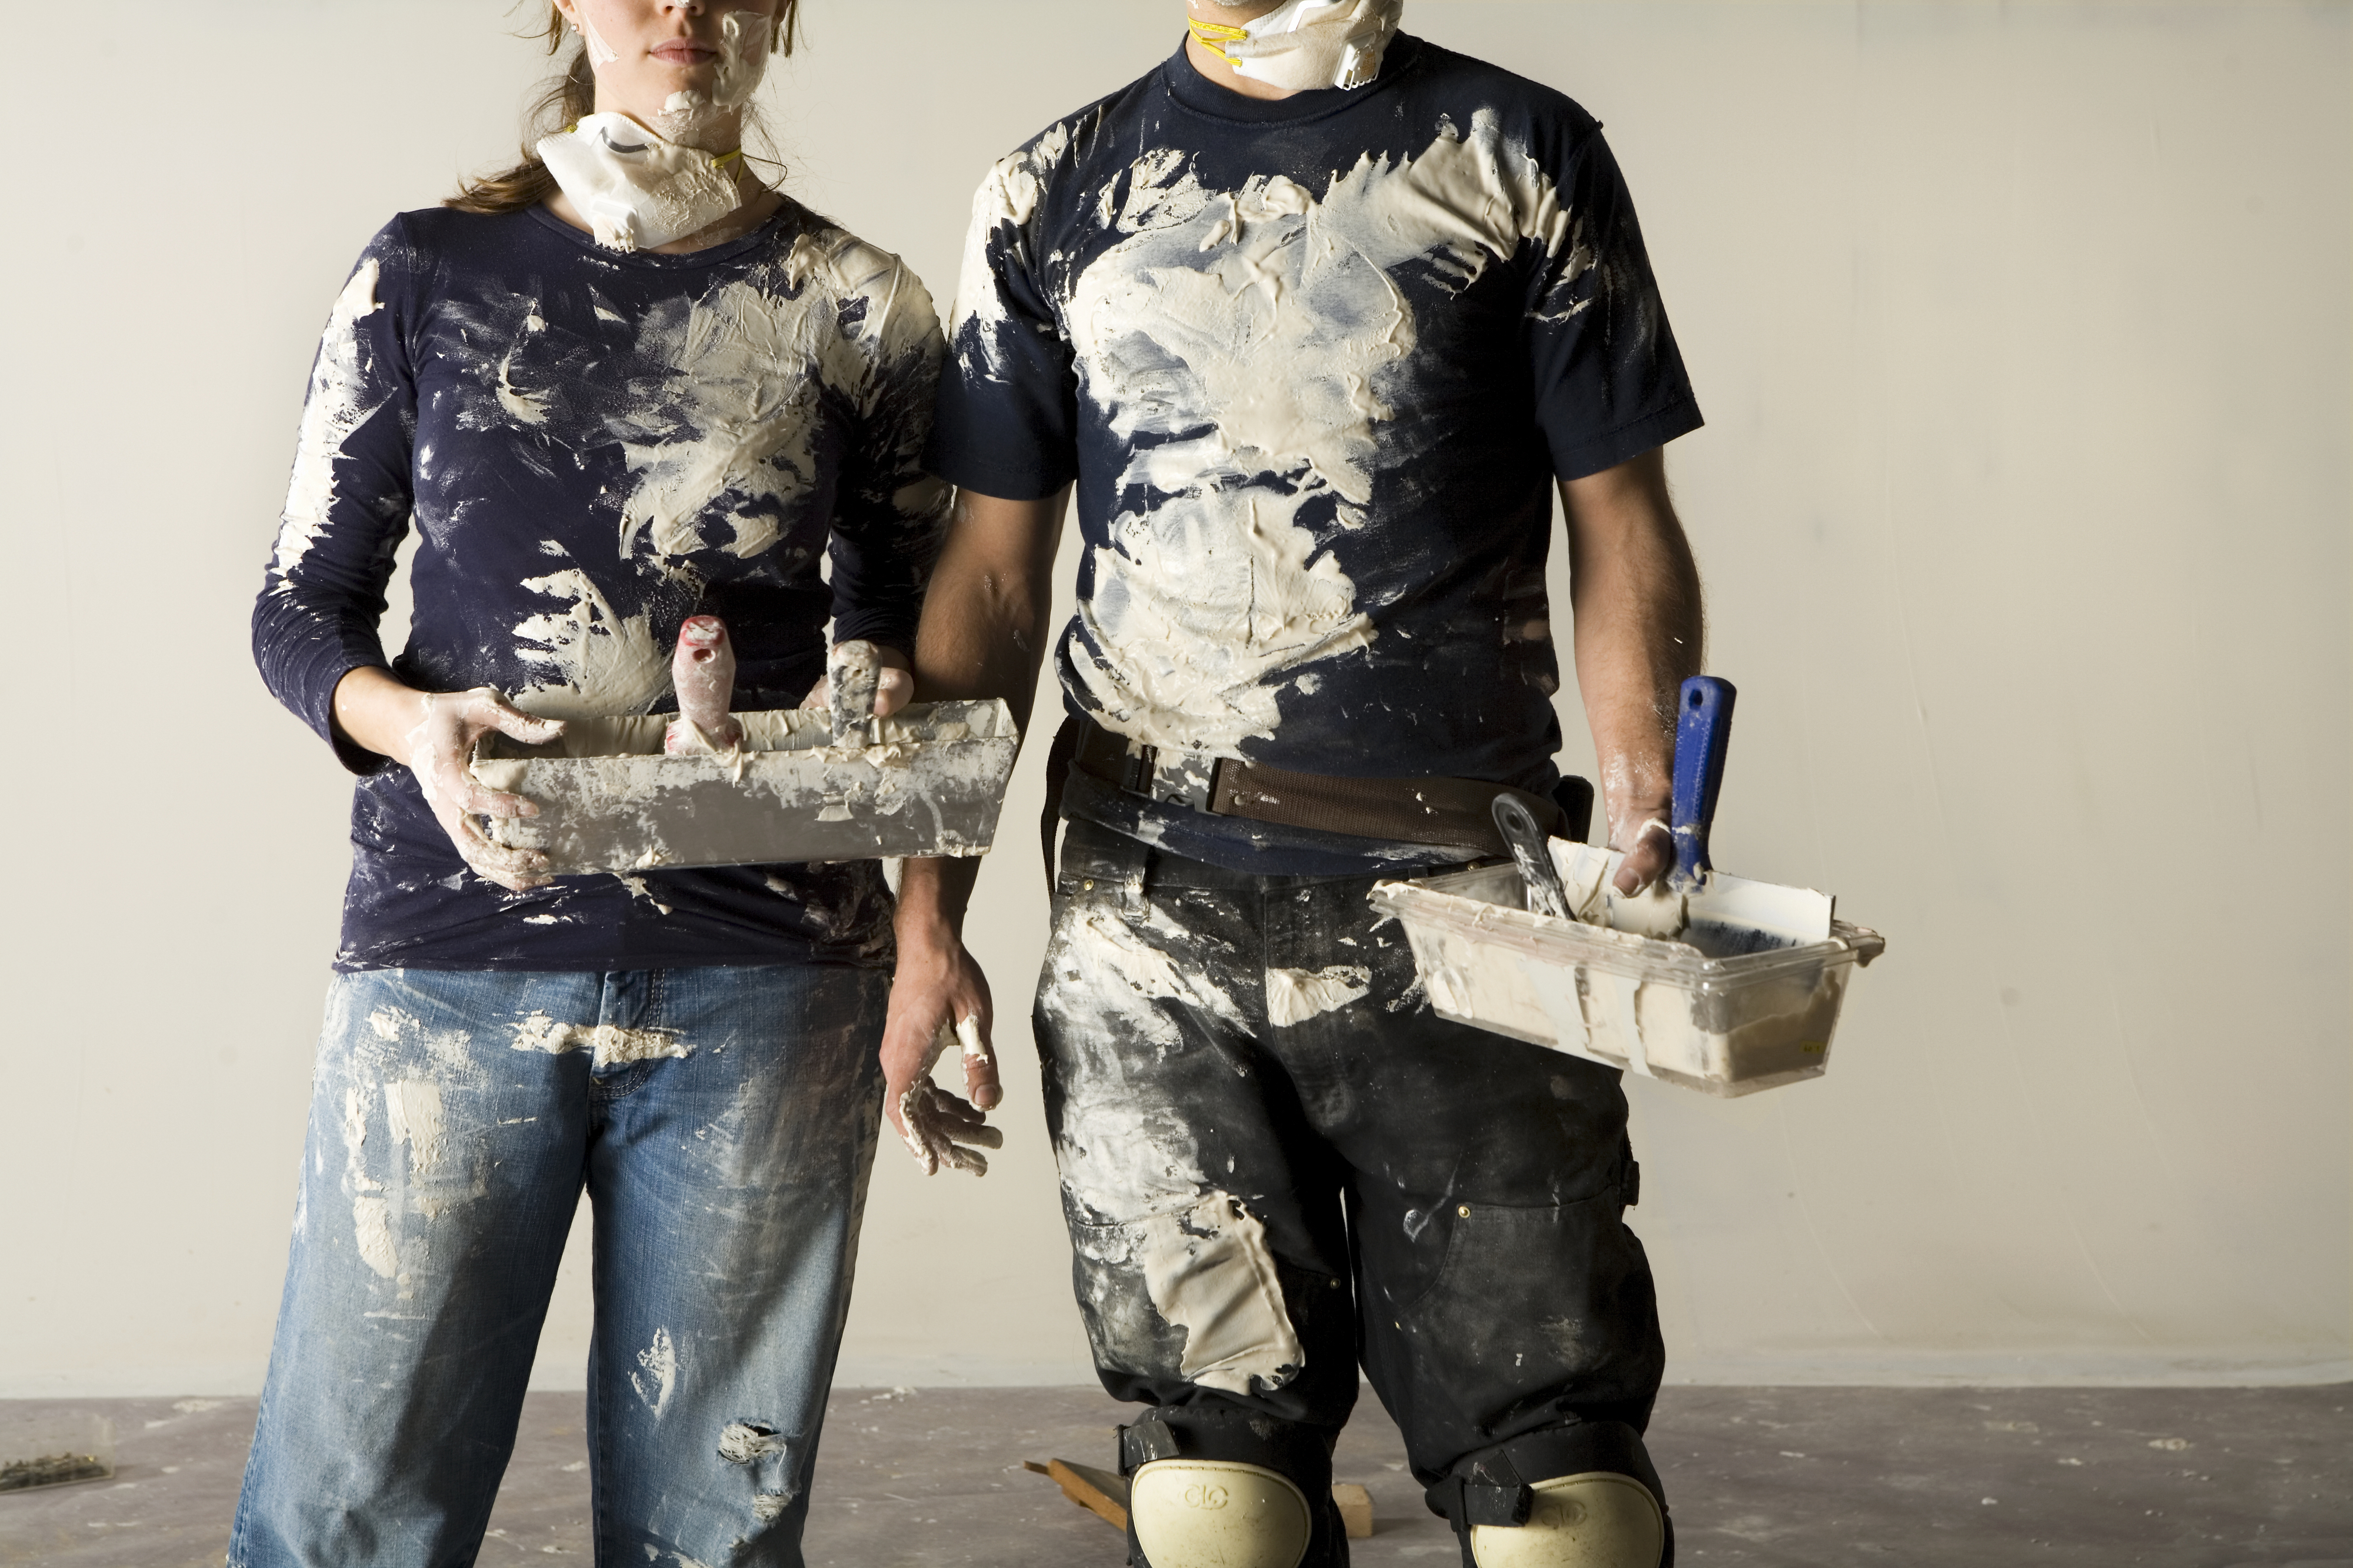 couple covered in paint after an attempted DIY project